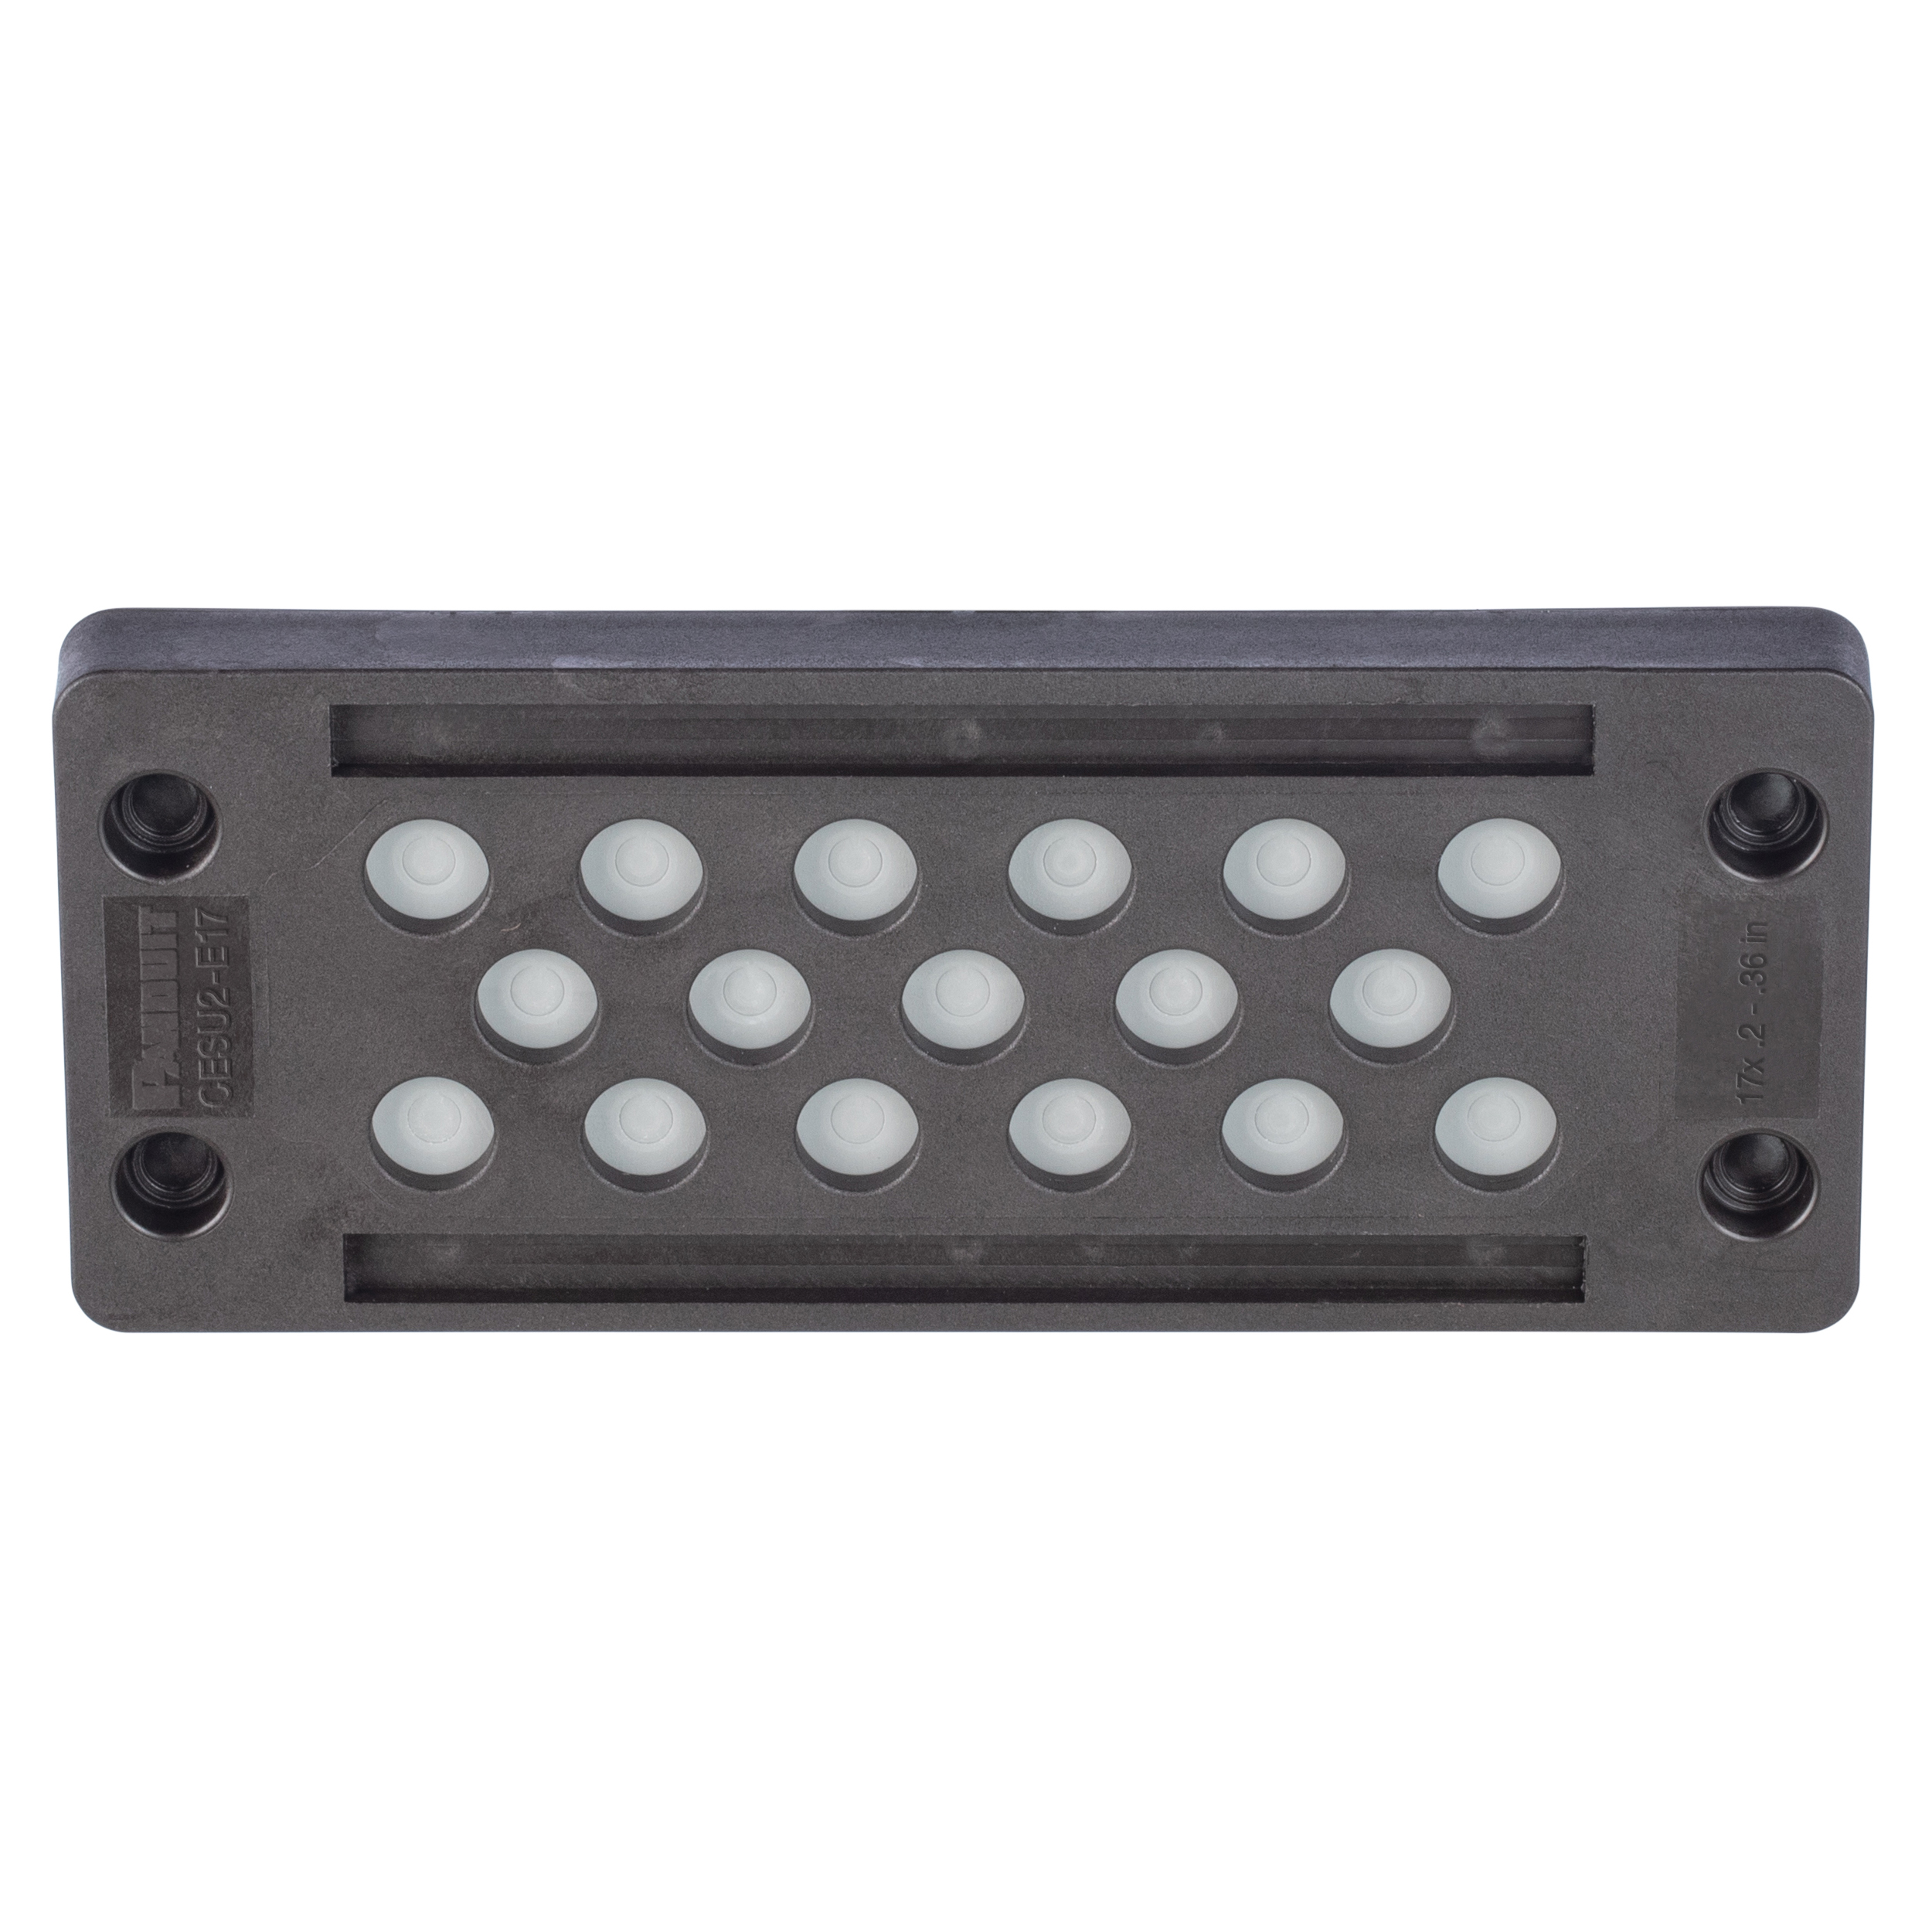 Cable Entry System, Un-Terminated, IP65, 4.41"X1.42",17 holes,1PC